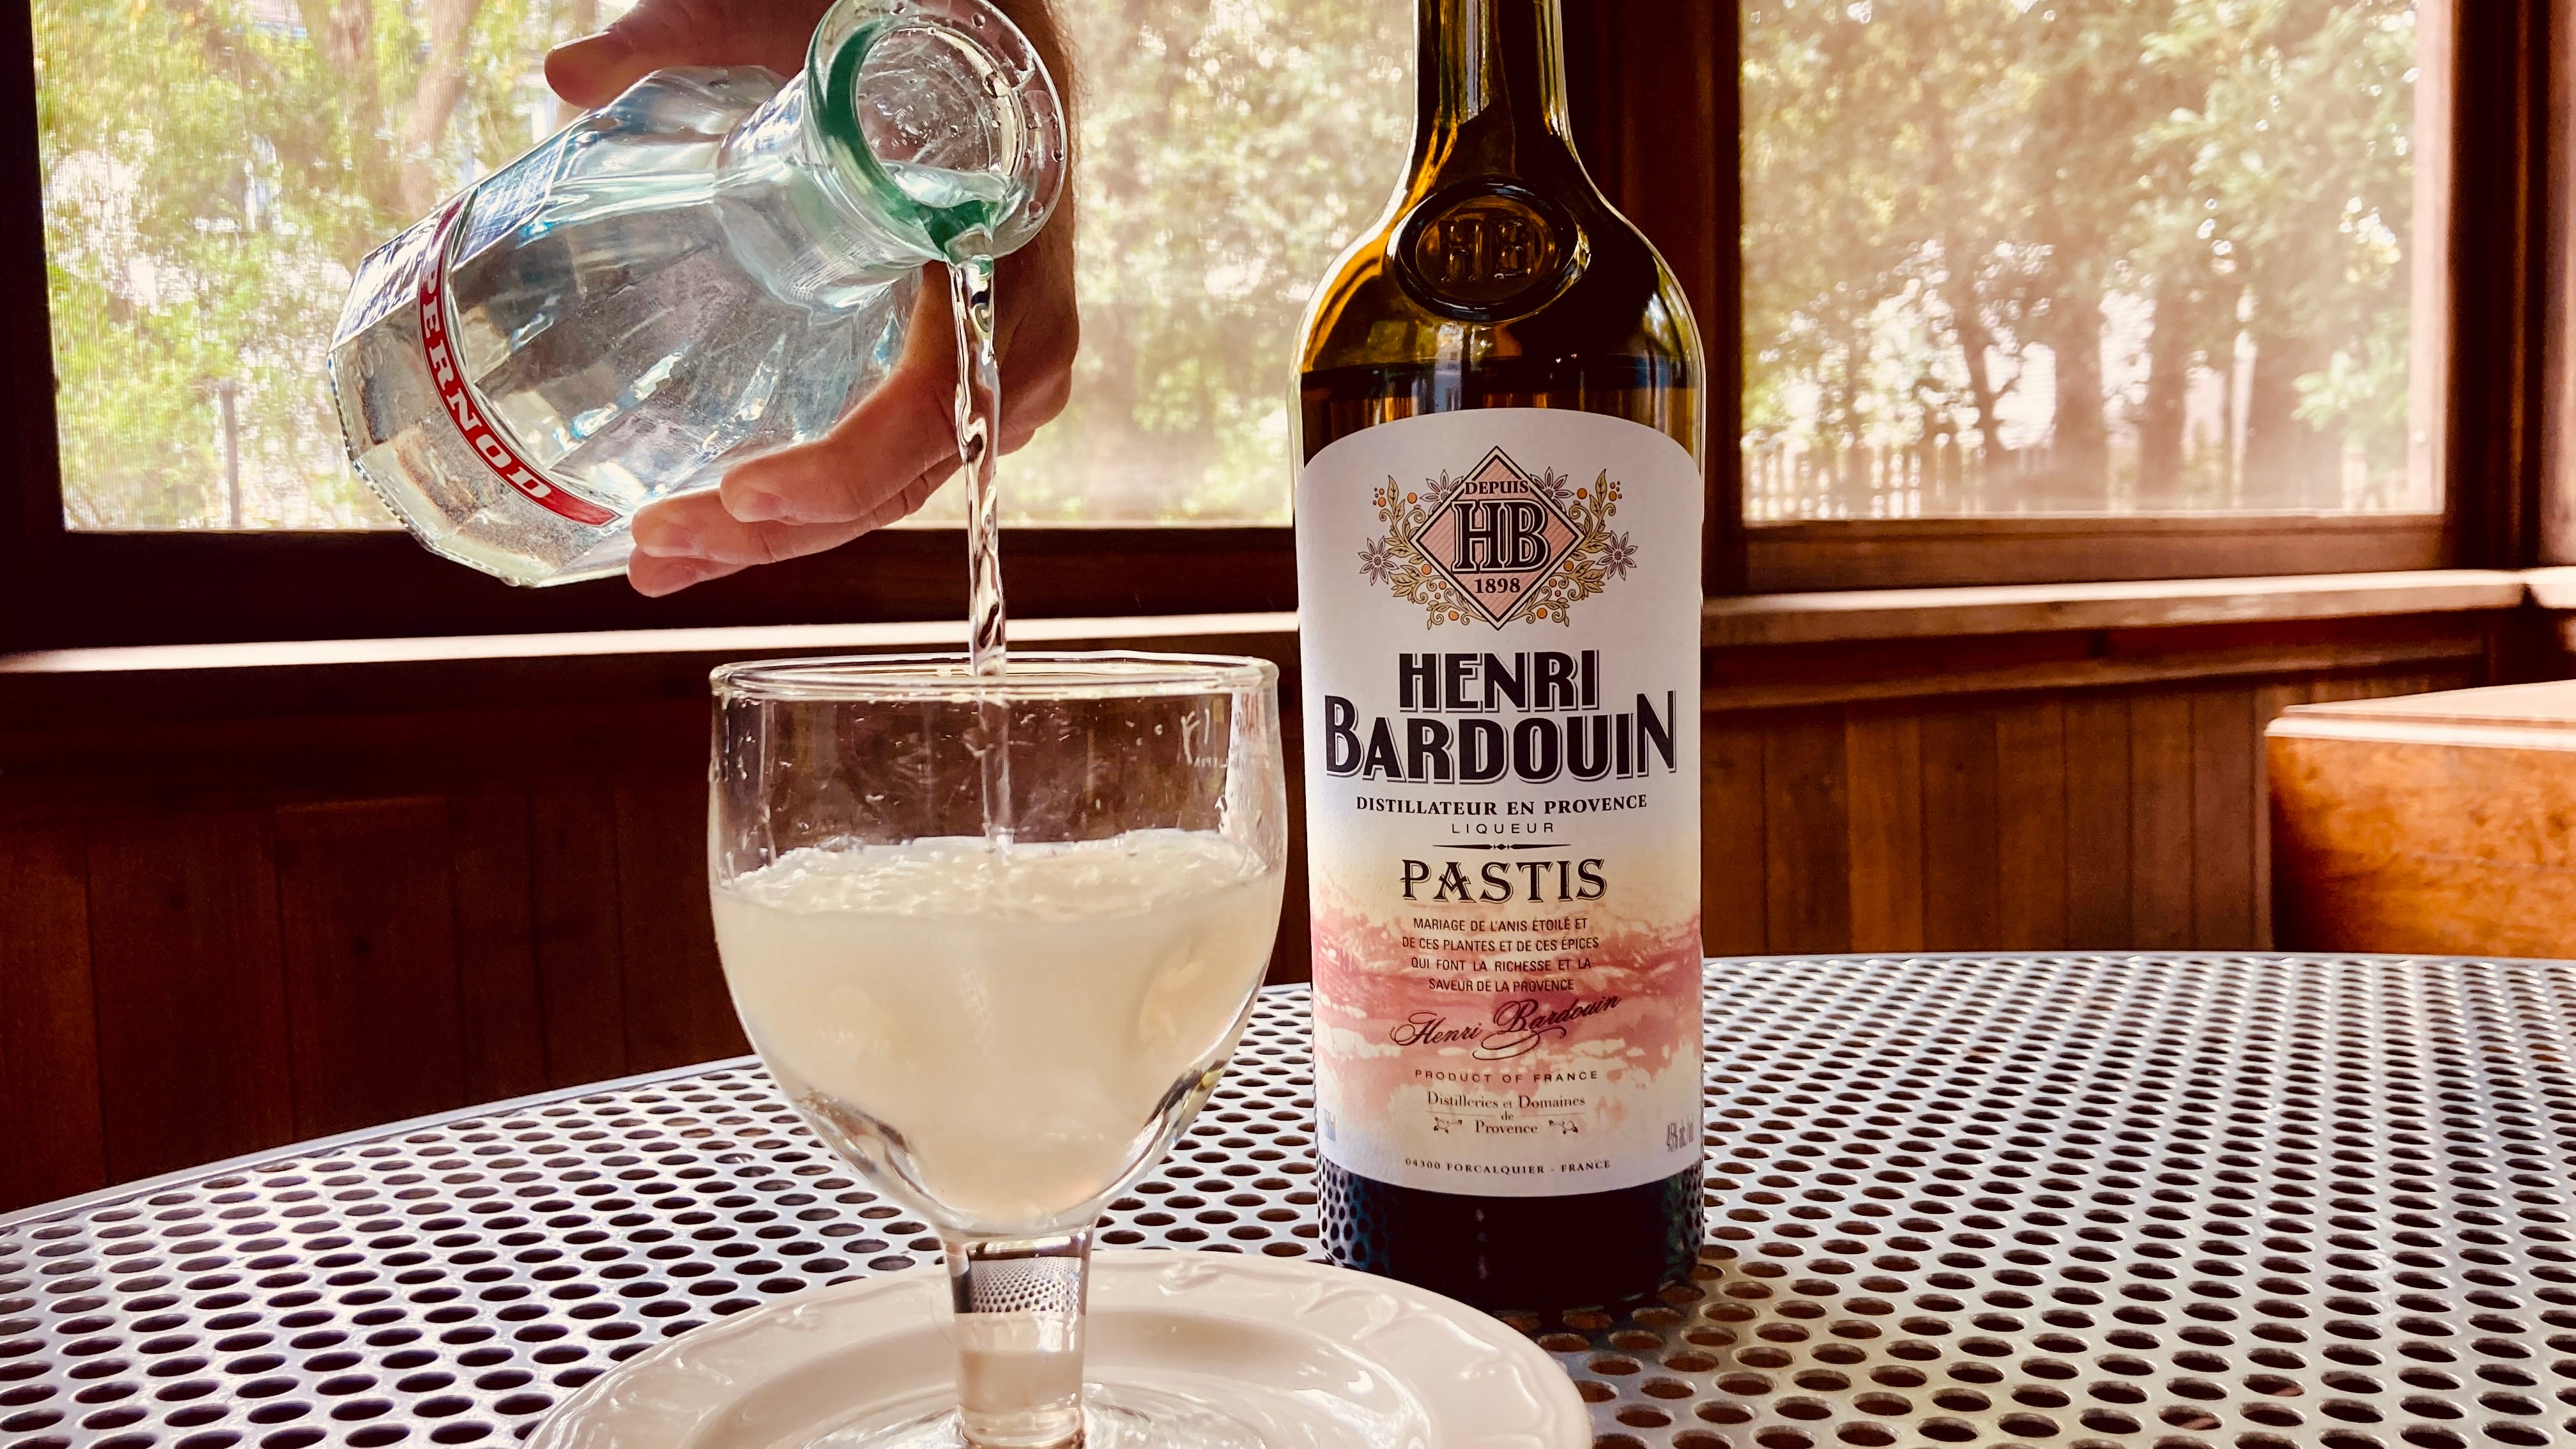 Pastis Miami on Instagram: Henri Bardouin Pastis is not just any aniseed  spirit. The secret lies in the picking, macerating, distilling and  balancing of over 65 plants and spices to perfection. A